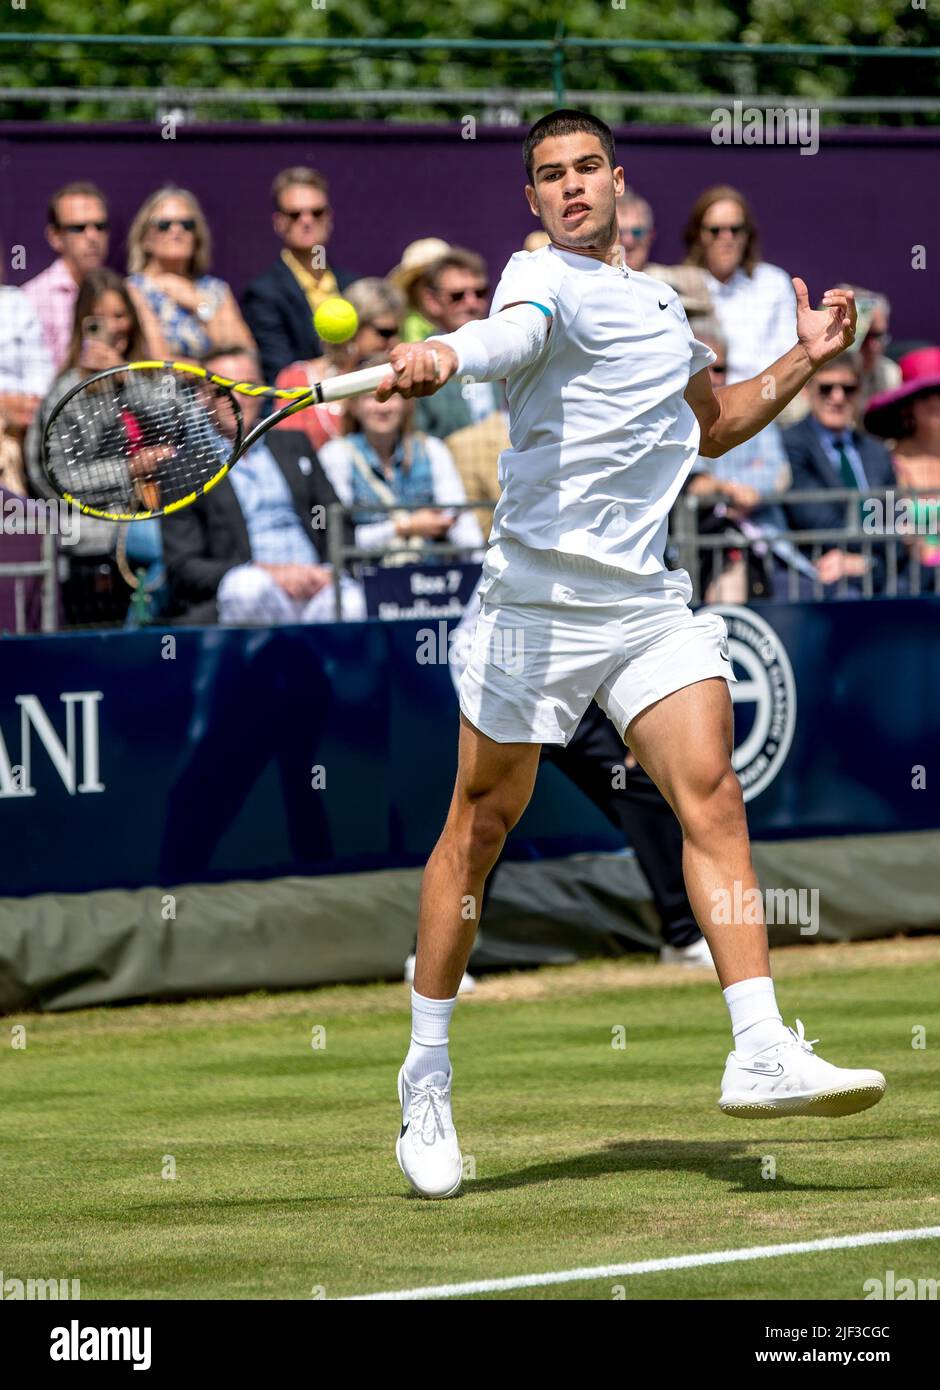 Carlos Alcaraz plays a forehand shot during the Giorgio Armani Tennis Classic at the Hurlingham Club, London, UK on 25 June 2022